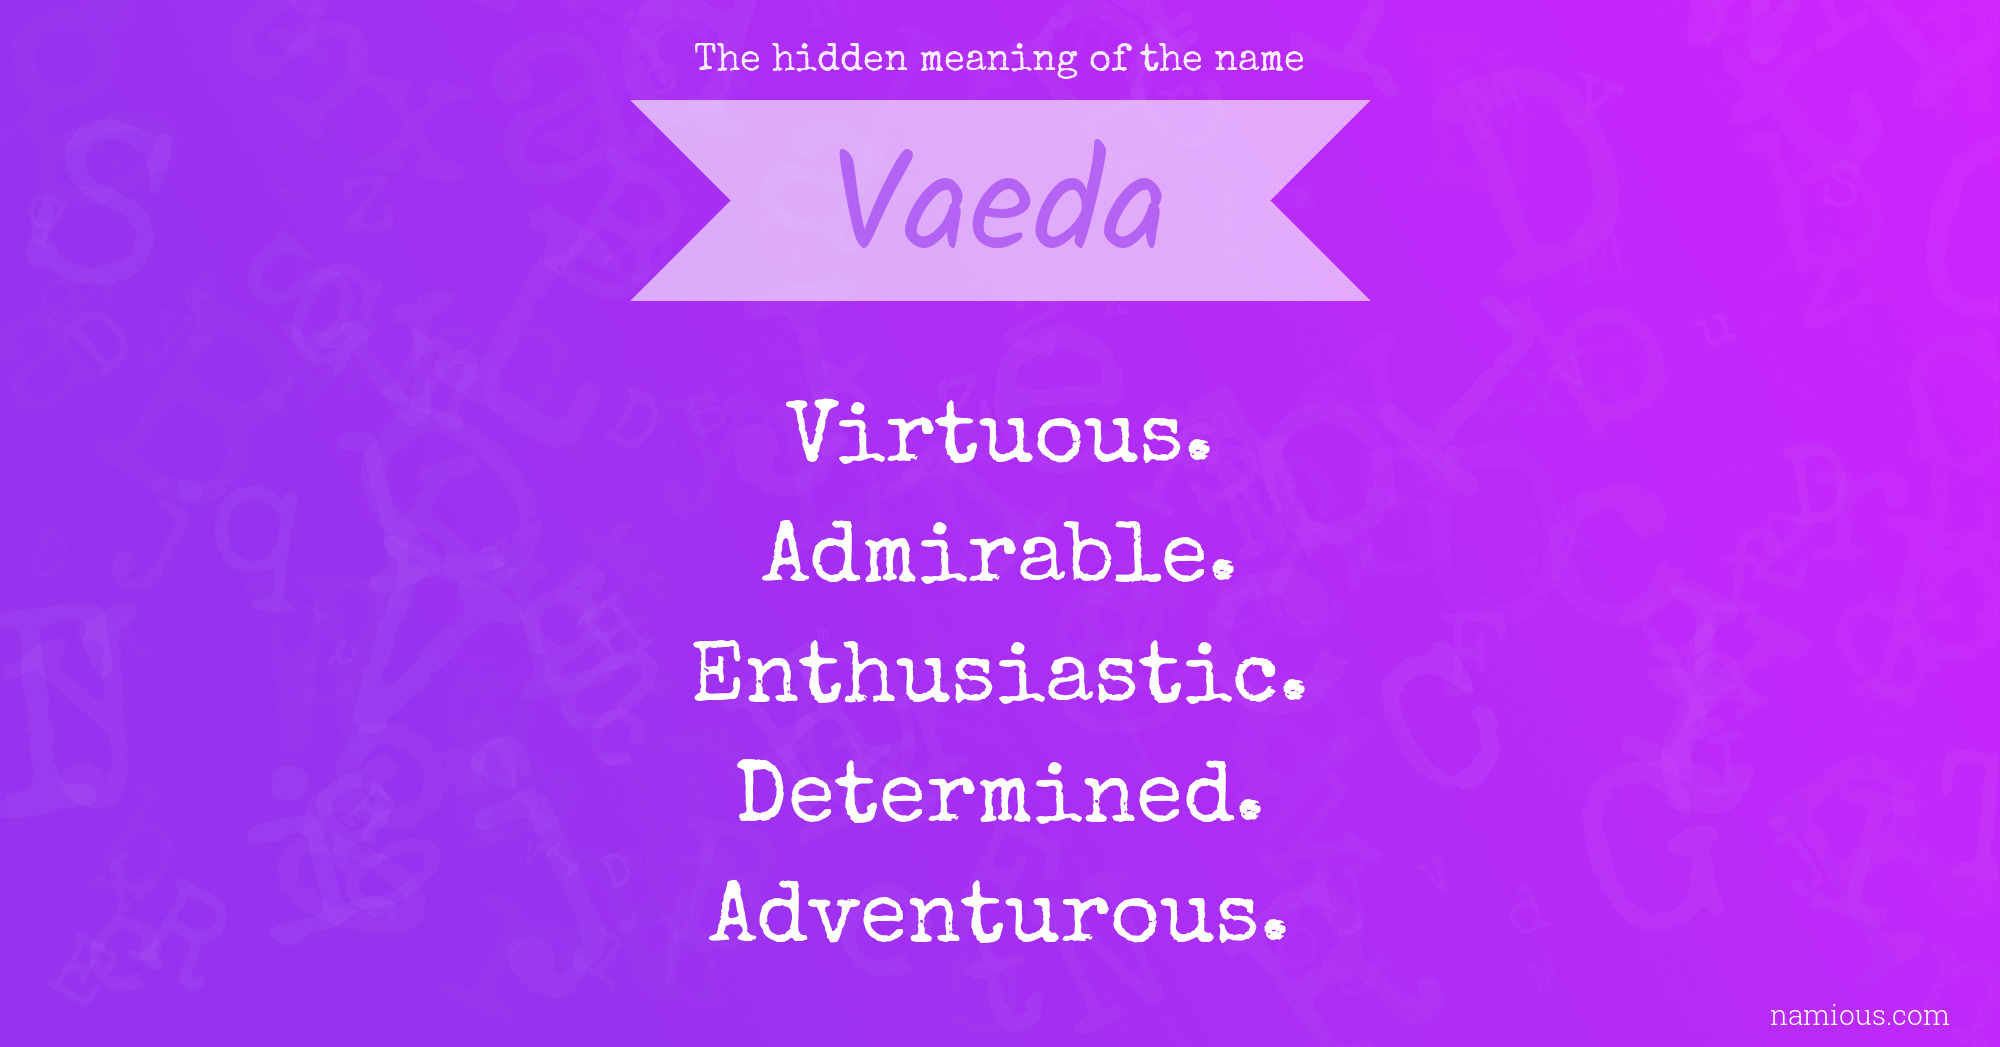 The hidden meaning of the name Vaeda